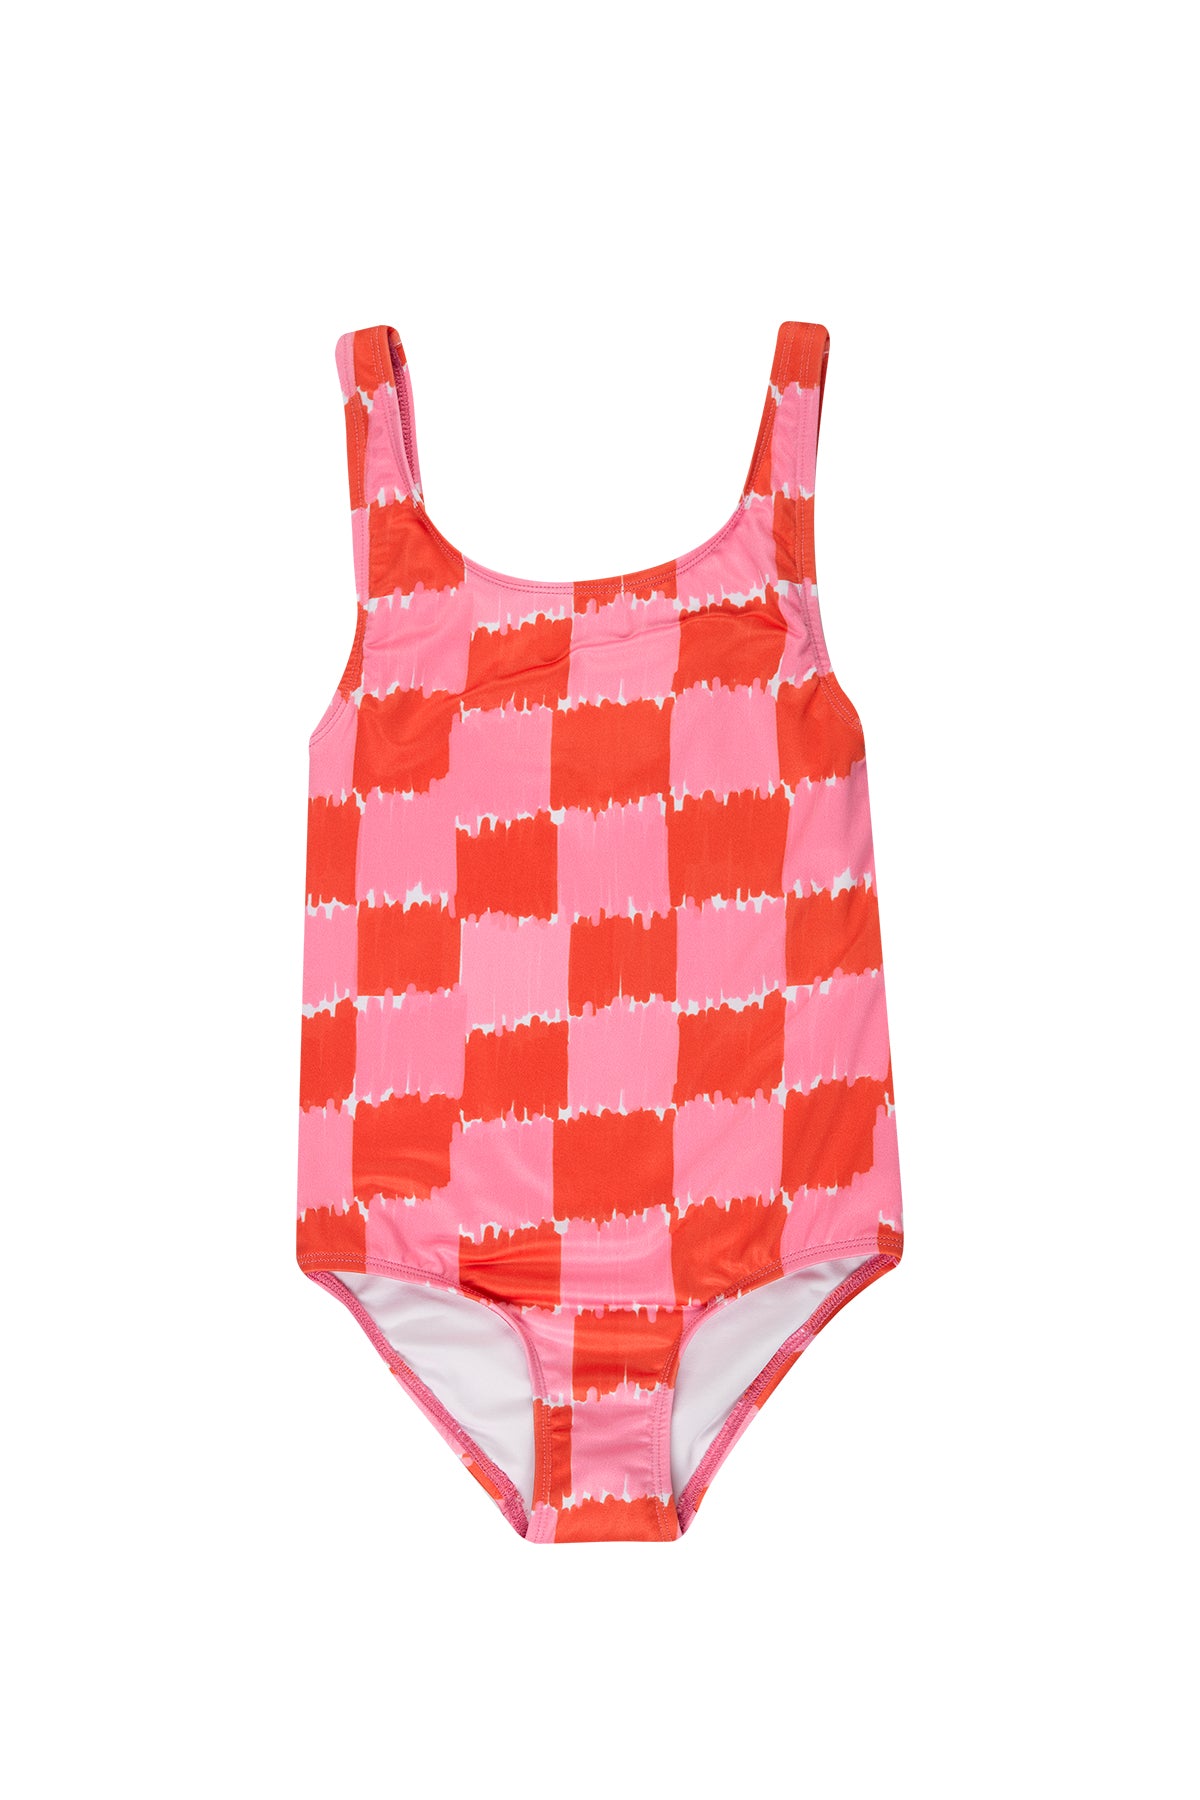 RED AND PINK GINGHAM SWIMSUIT makids